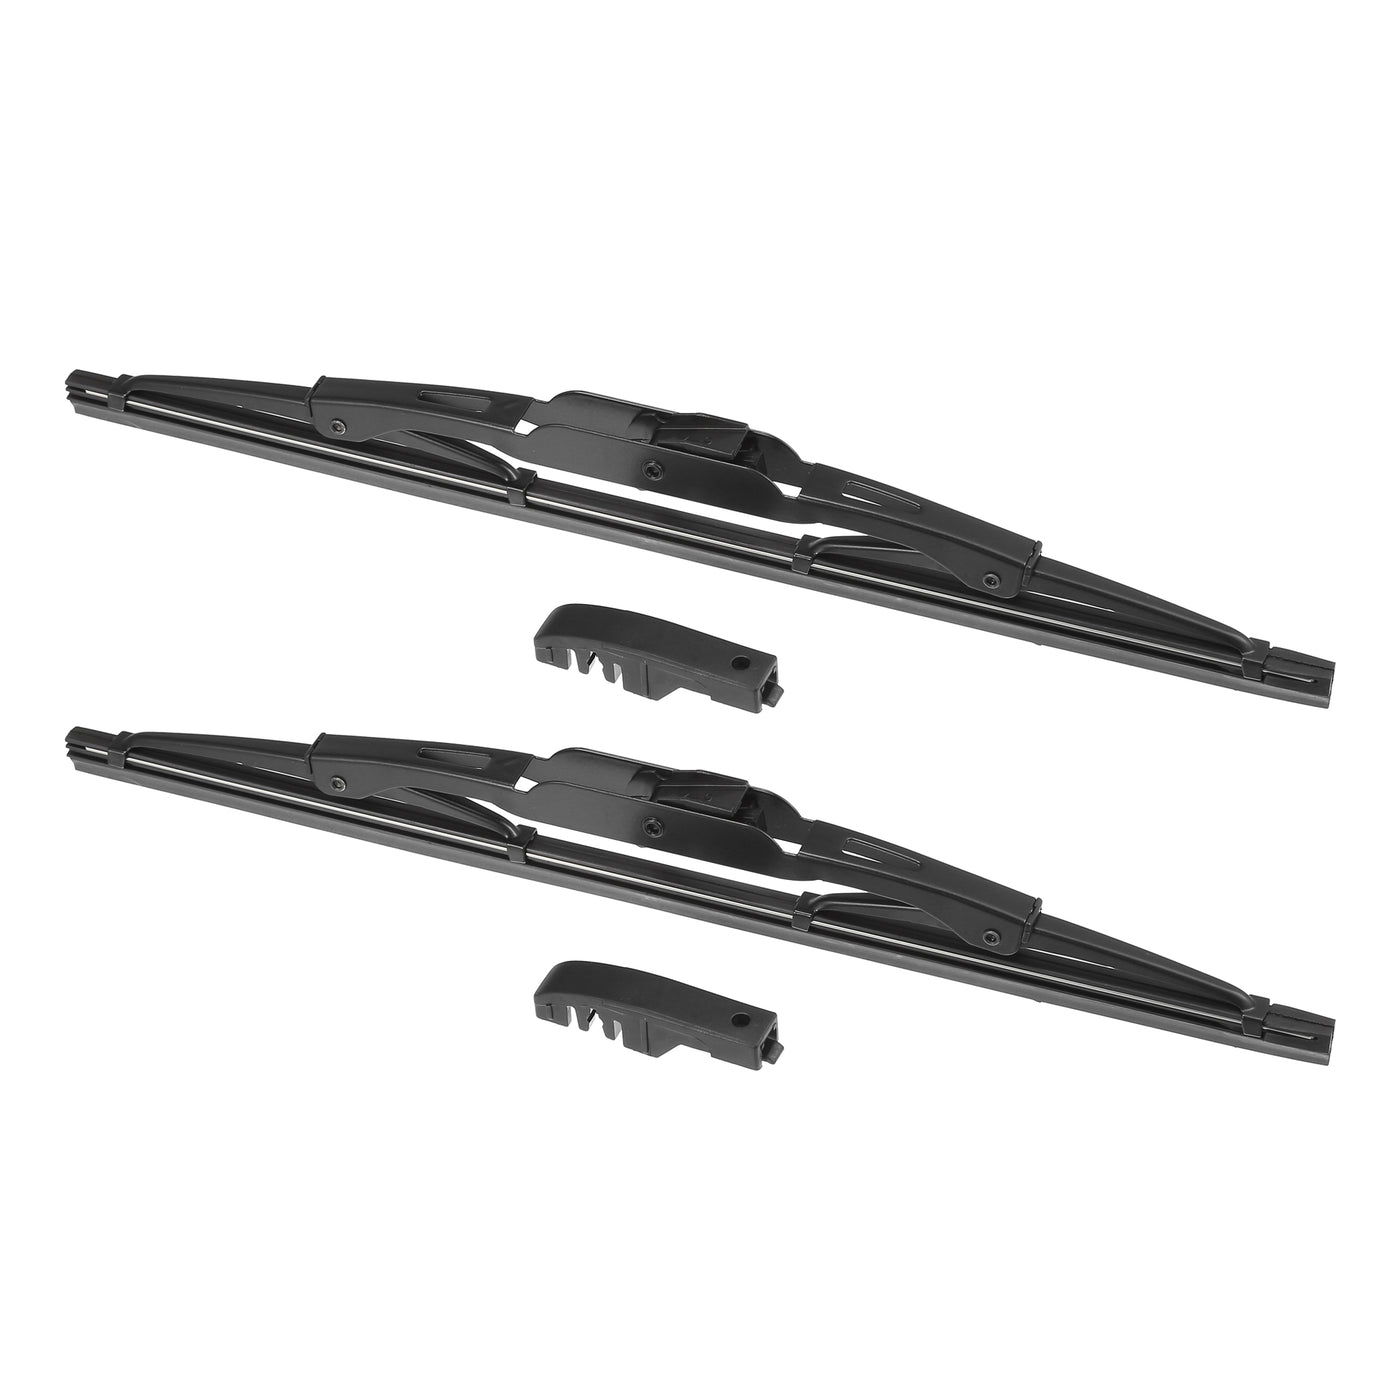 X AUTOHAUX 2pcs Rear Windshield Wiper Blade Replacement for Jeep Compass 2007-2015 for Jeep Grand Cherokee 1998-2004 for Ford Fiesta 2001-2008